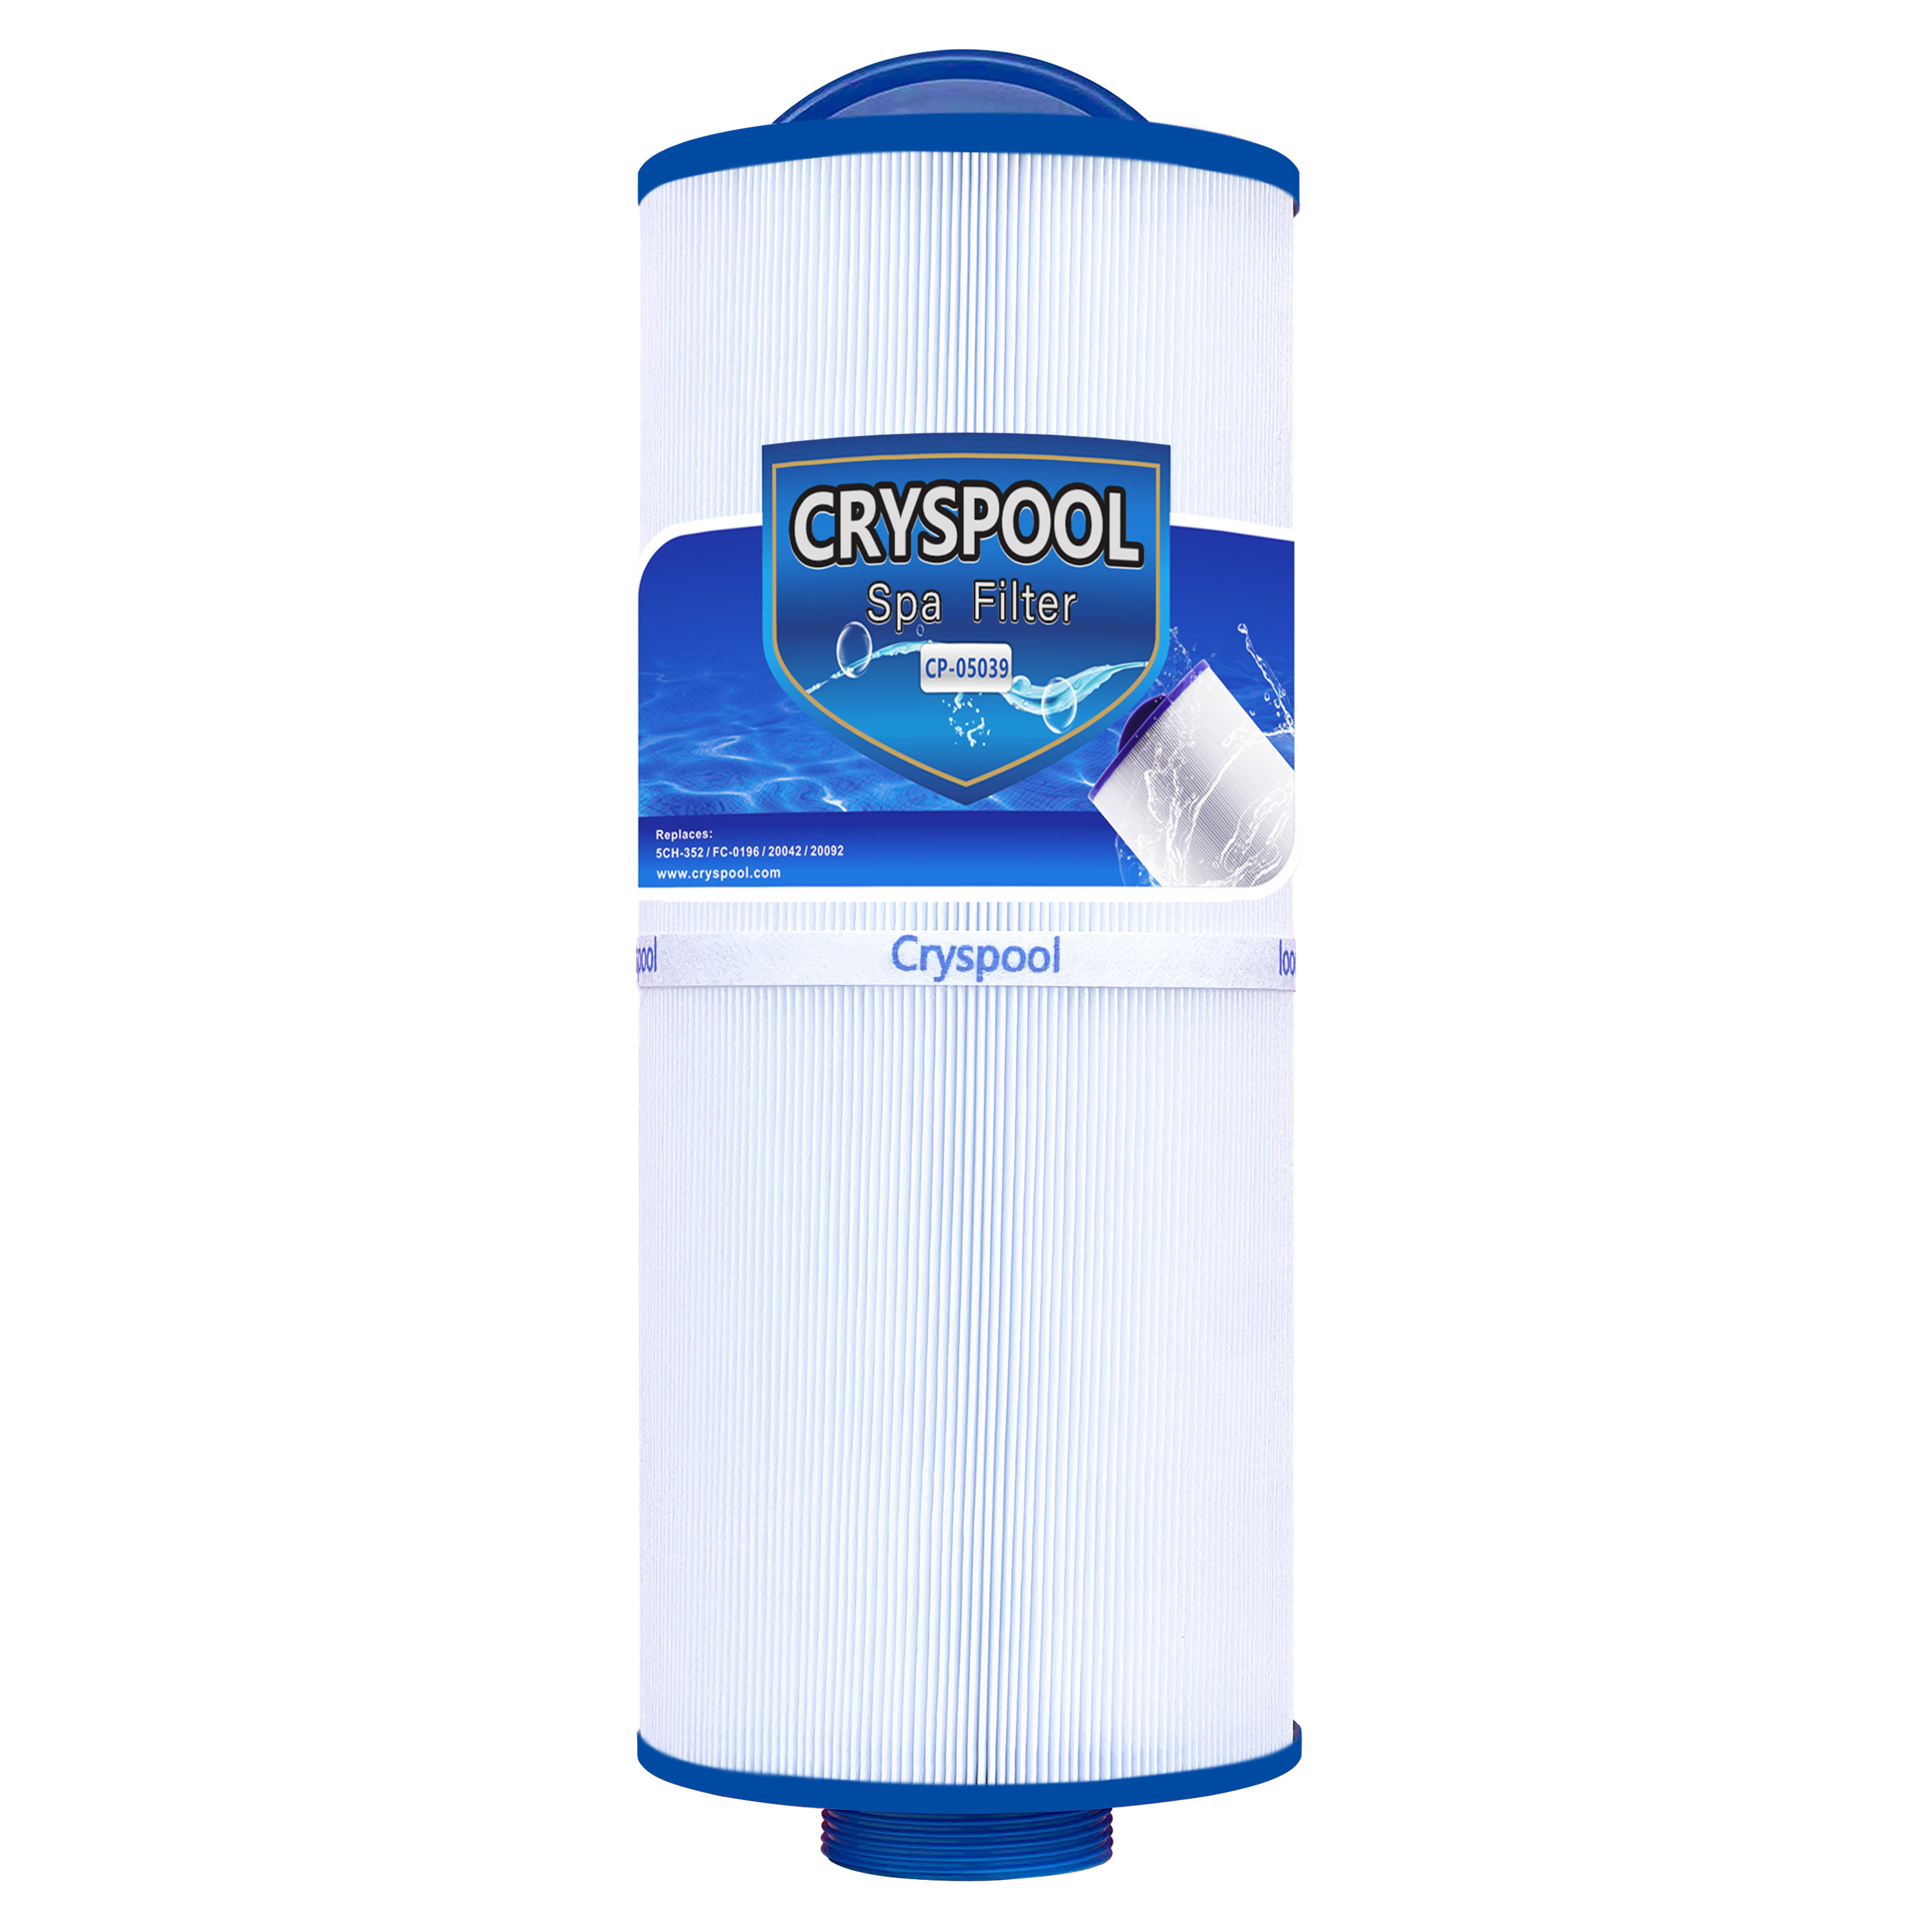 Reasonable price for C 6430 Filter - Cryspool MPT-Thread Spa Filter Compatible with Marquis 35, Marquis Spa 20042, 20092, 370-0240, PPM35SC-F2M, 5CH-352, FC-0196, 35 sq.ft. – Cryspool